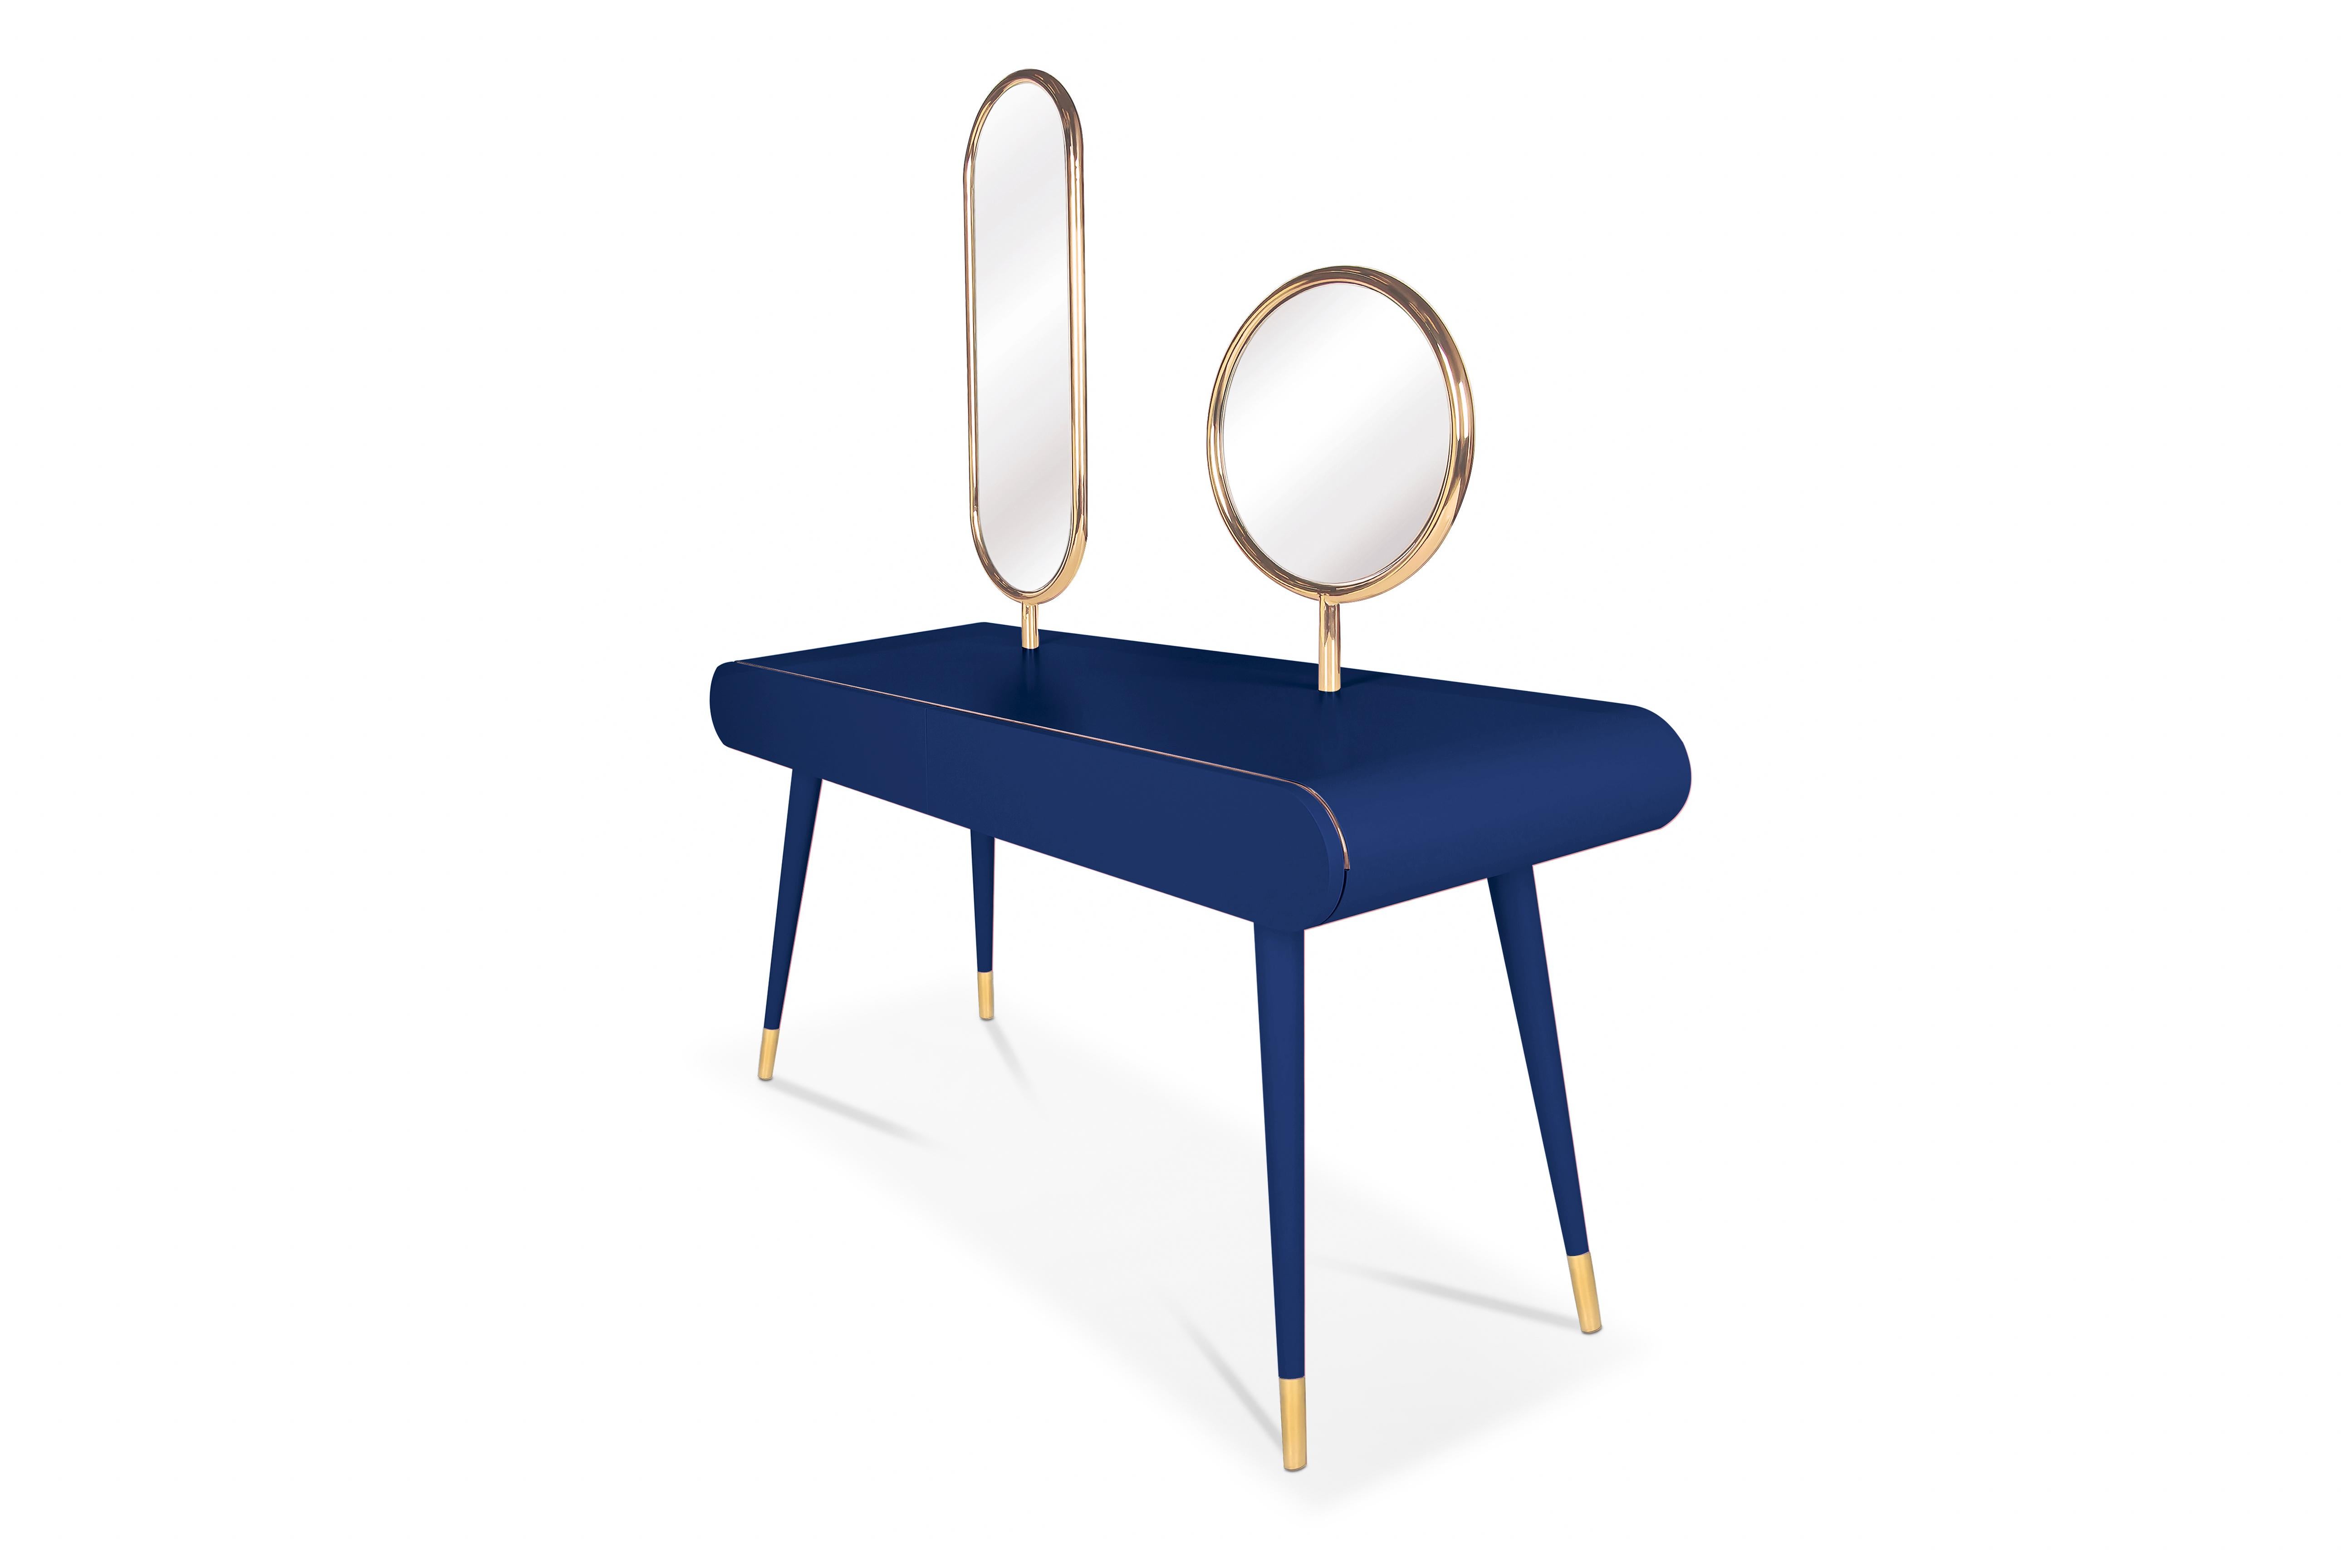 Grace dressing table - Royal Stranger
Dimensions: 182 x 160 x 45 cm
Materials: Lacquered wood, brass
Available in different colors: Pink and Royal red, mint and Royal green, light blue and Royal, blue
Royal Stranger is an exclusive furniture